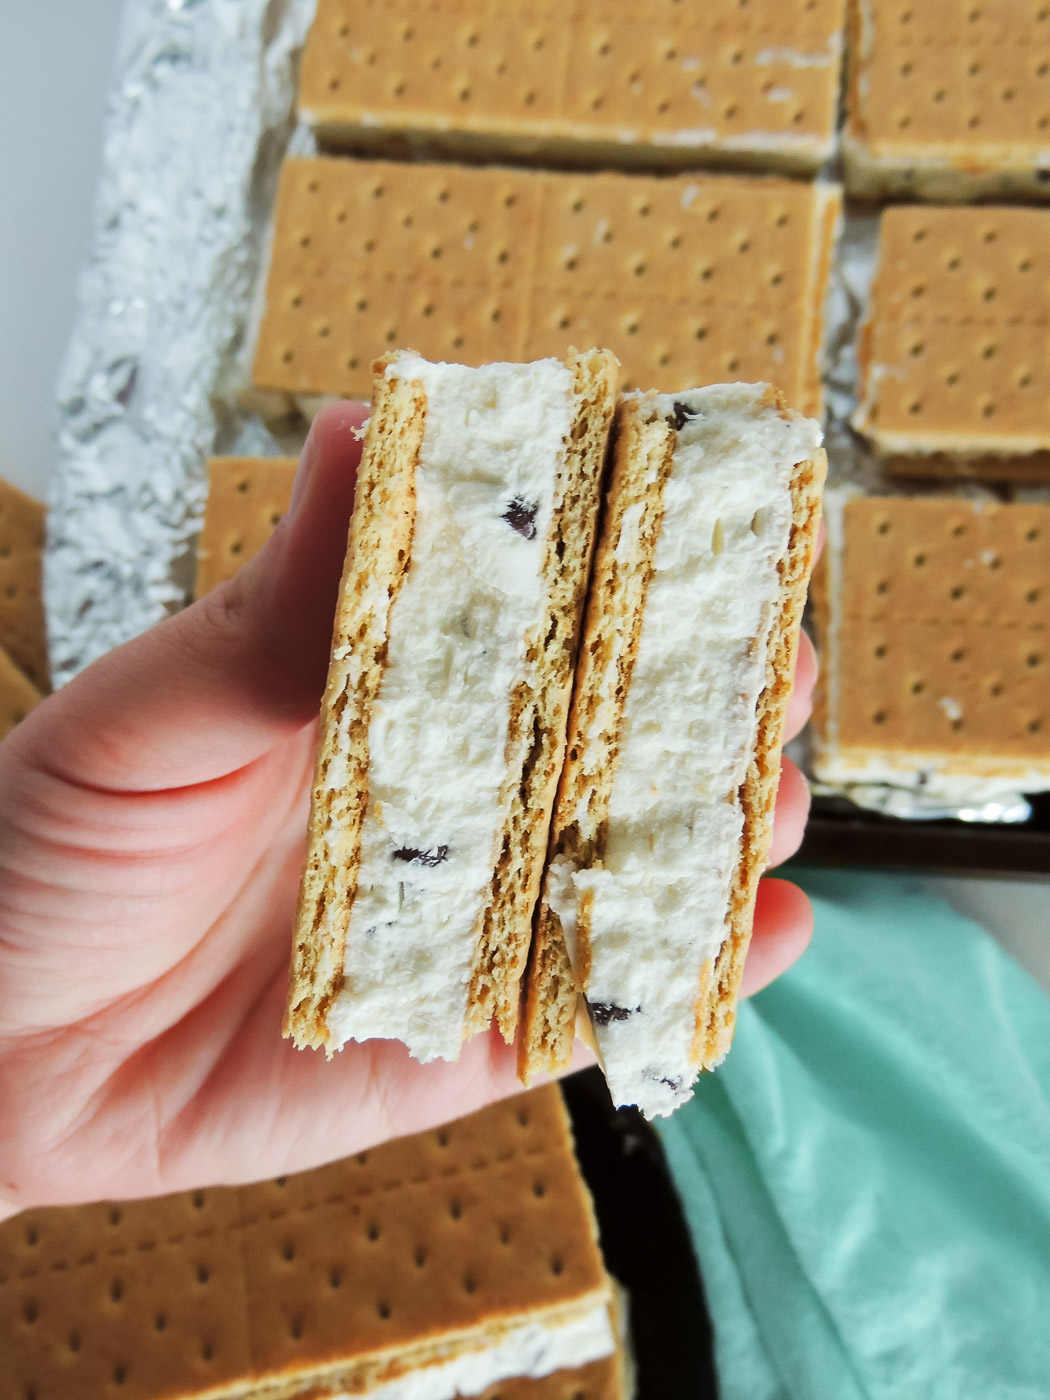 White woman's hand holding a homemade ice cream sandwich that has been cut in half